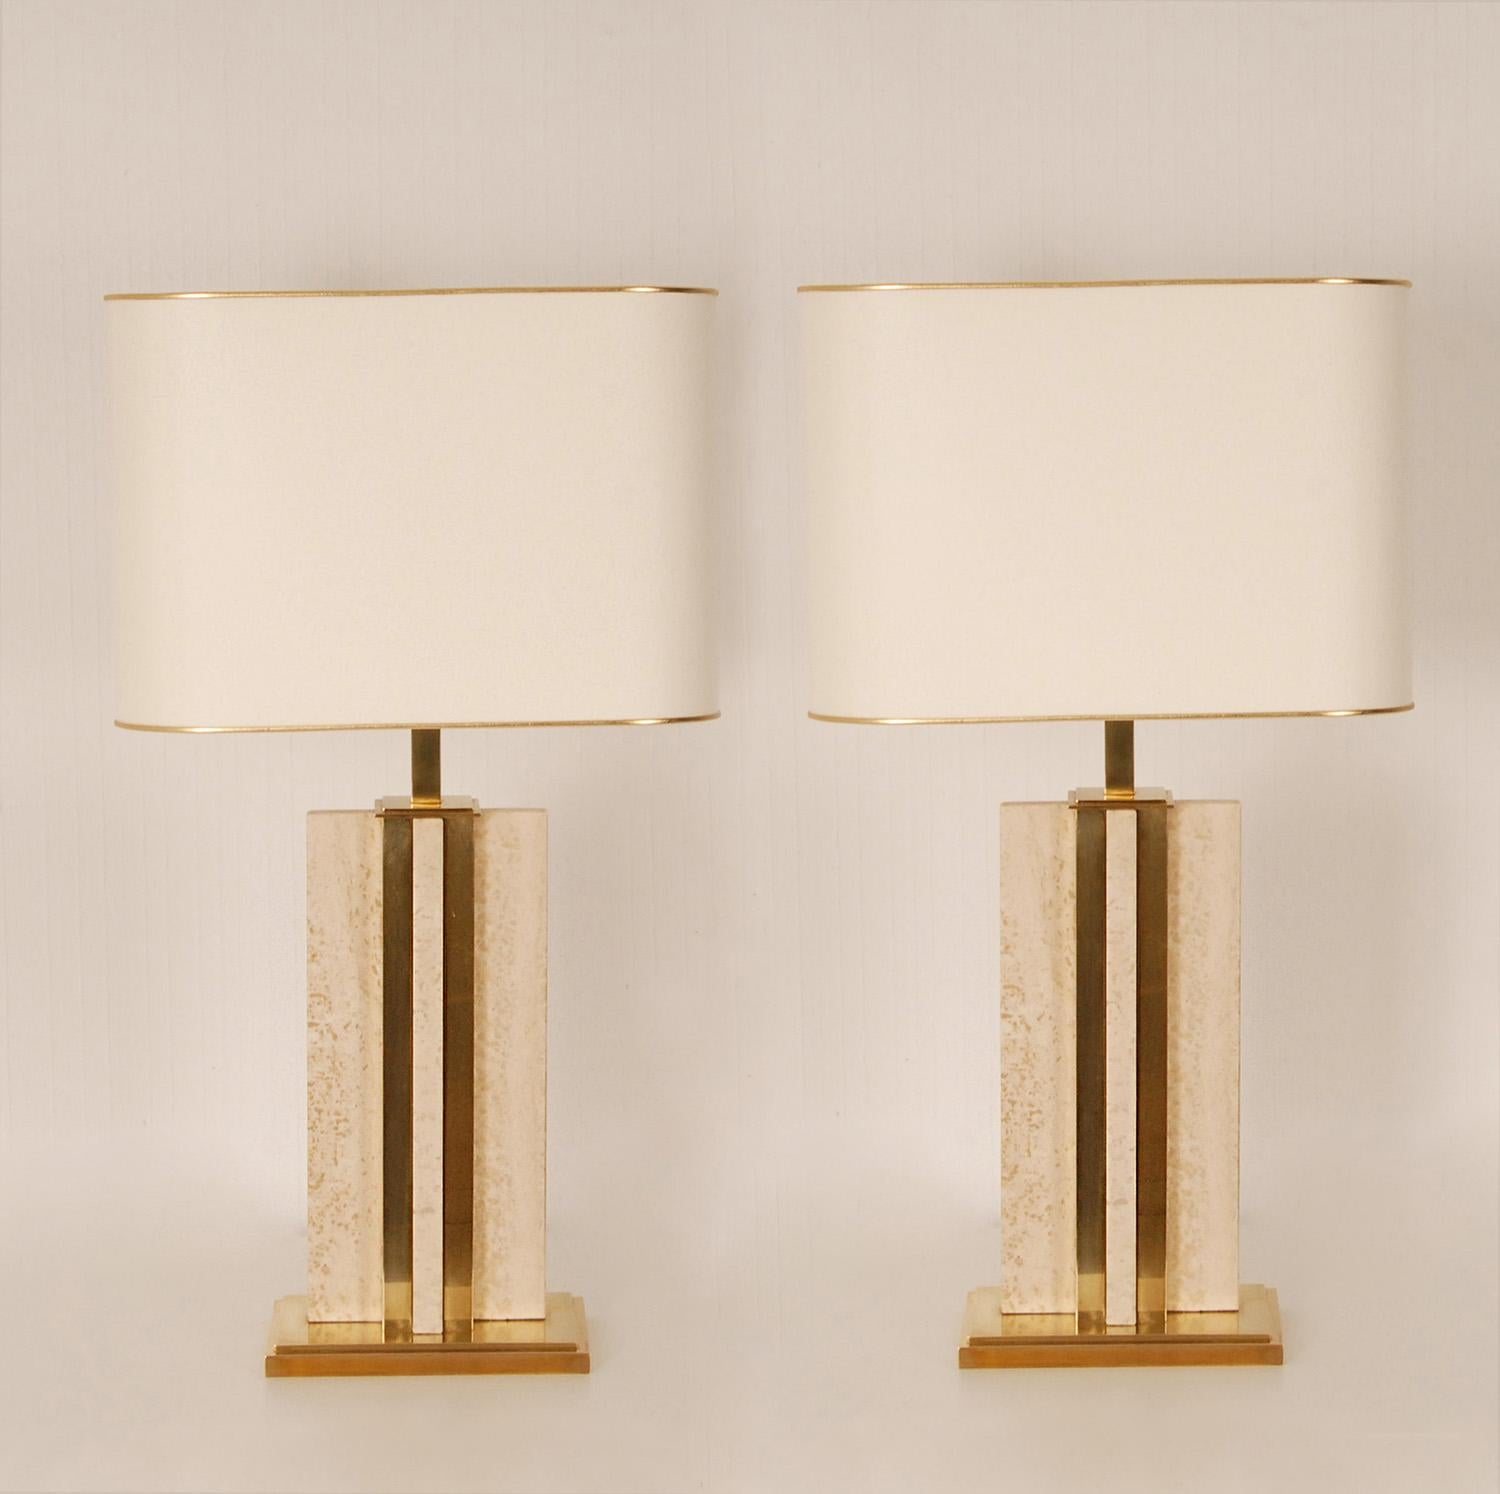 Vintage Tall Travertine marble and gold brass table lamps Willy Rizzo Style
Material: Travertine Marble and gold brass
Design: In the manner of Willy Rizzo, Jules Wabbes, Maison Charles and Fratelli Manelli
Origin: Europe 1970s
Style: Vintage, Mid